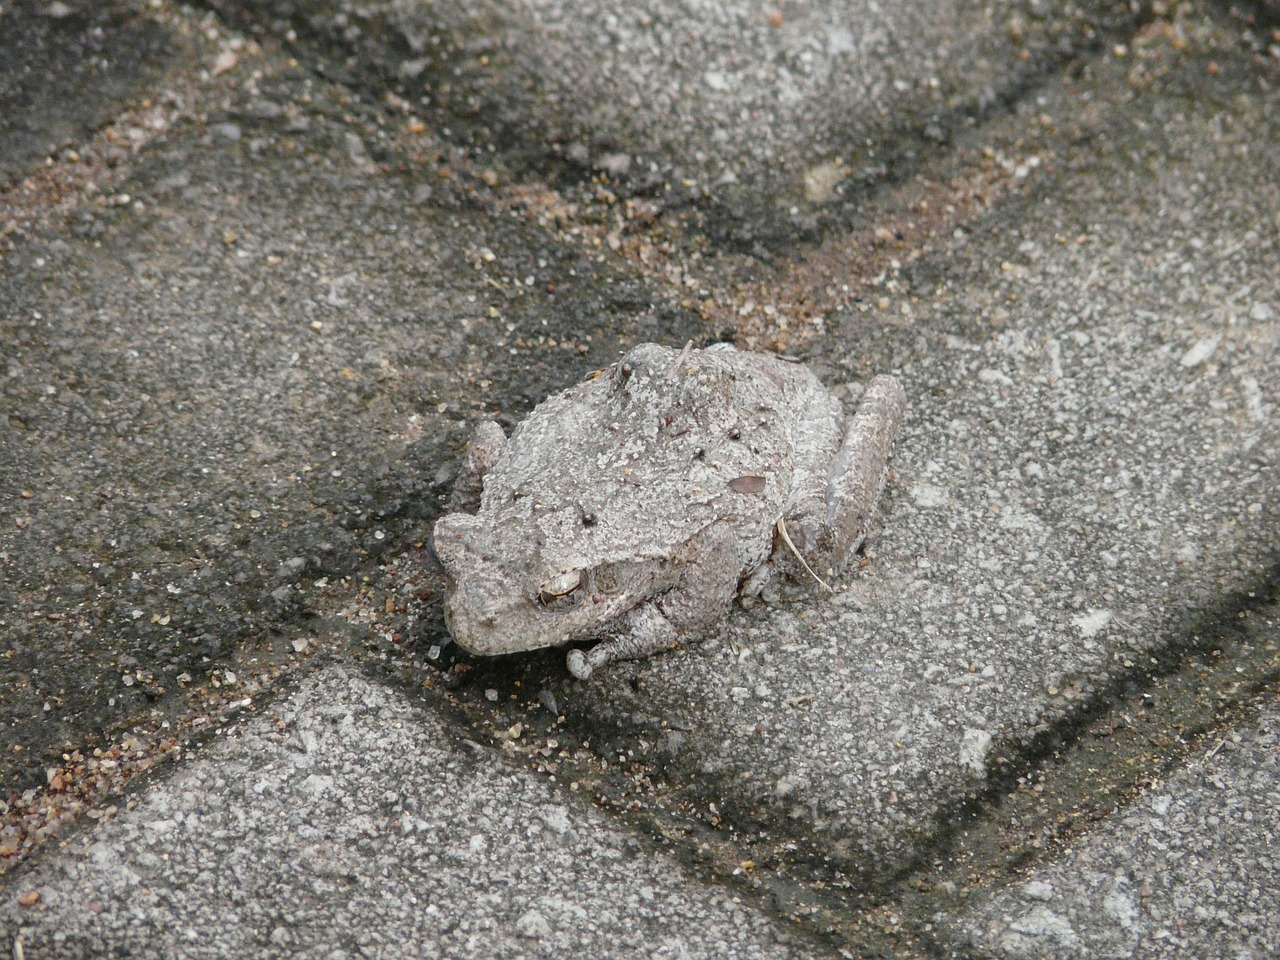 toad camouflage hide free photo